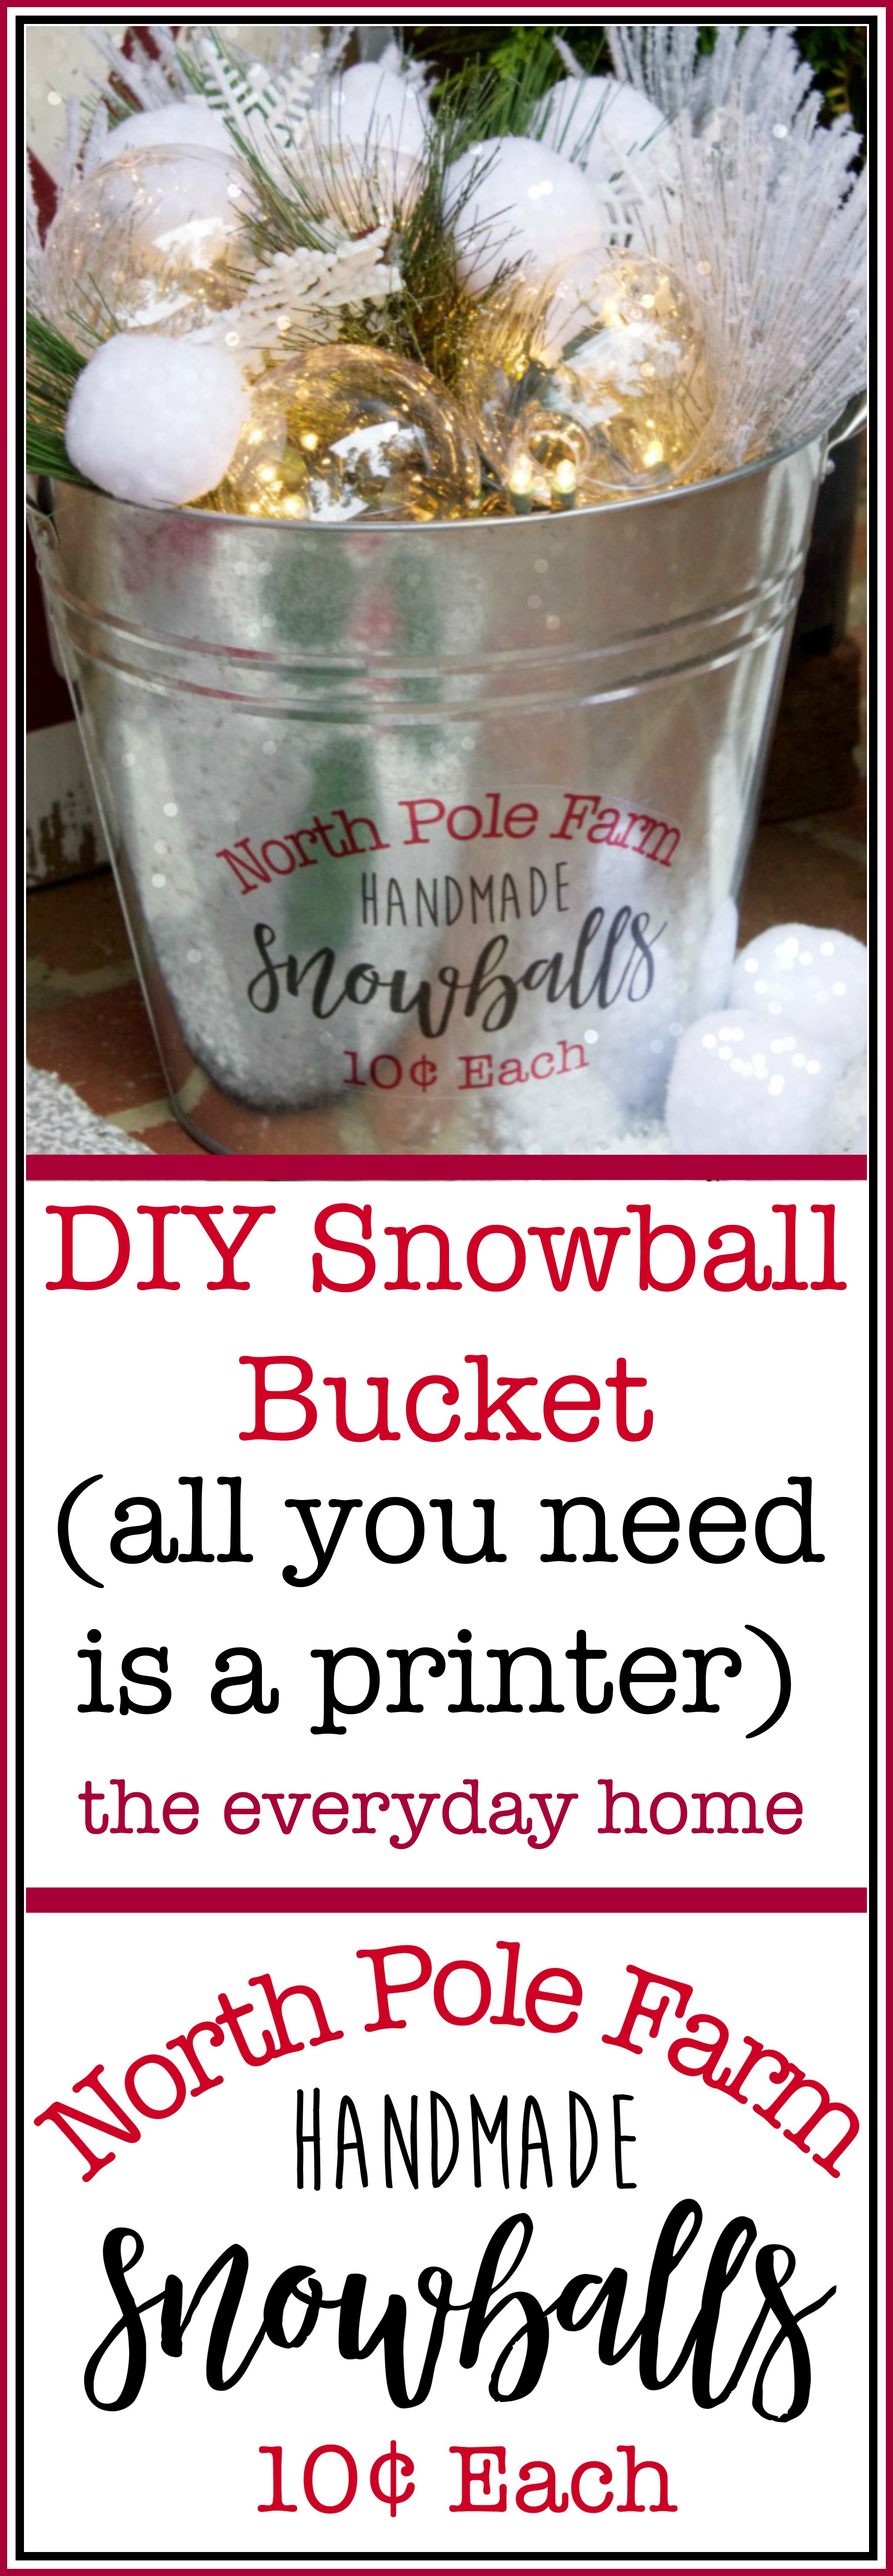 (all you need is a home printer!) DIY Snowball Bucket | The Everyday Home